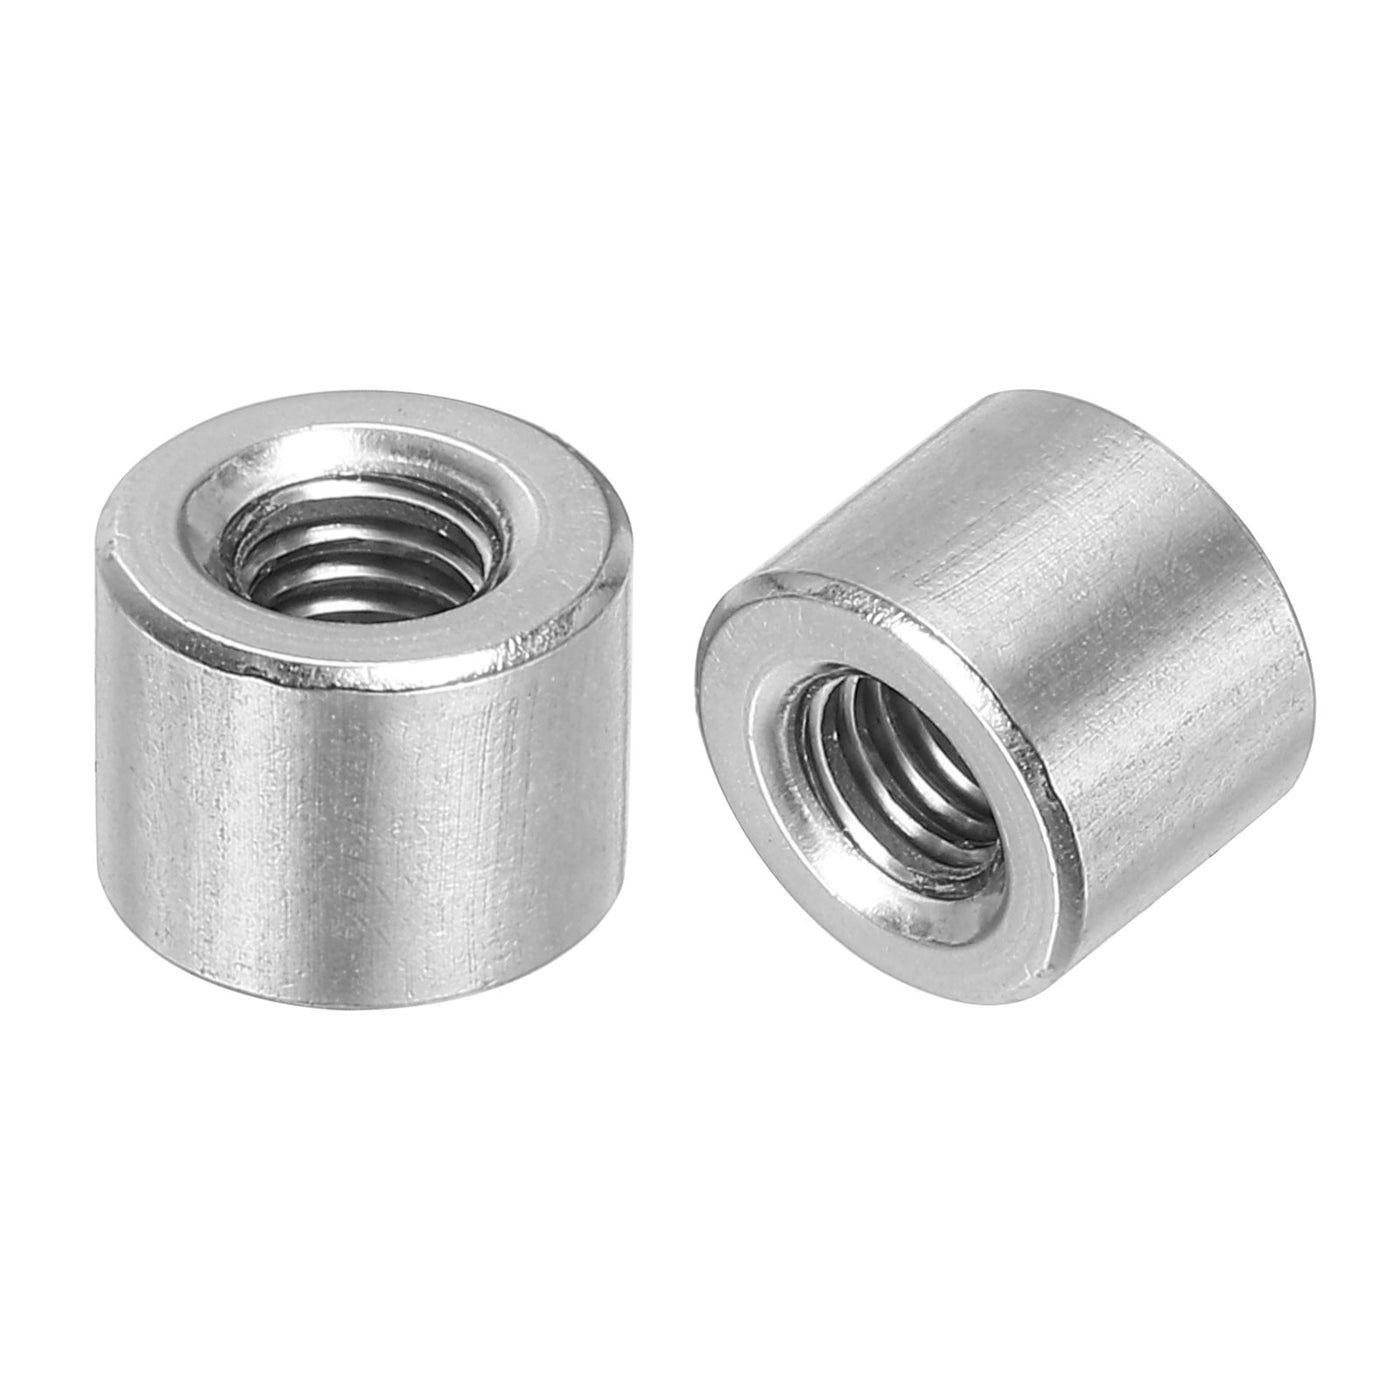 uxcell Uxcell 5Pcs Round Connector Nuts, M6x8x10mm Coupling Nut Sleeve Rod Bar Stud Nut